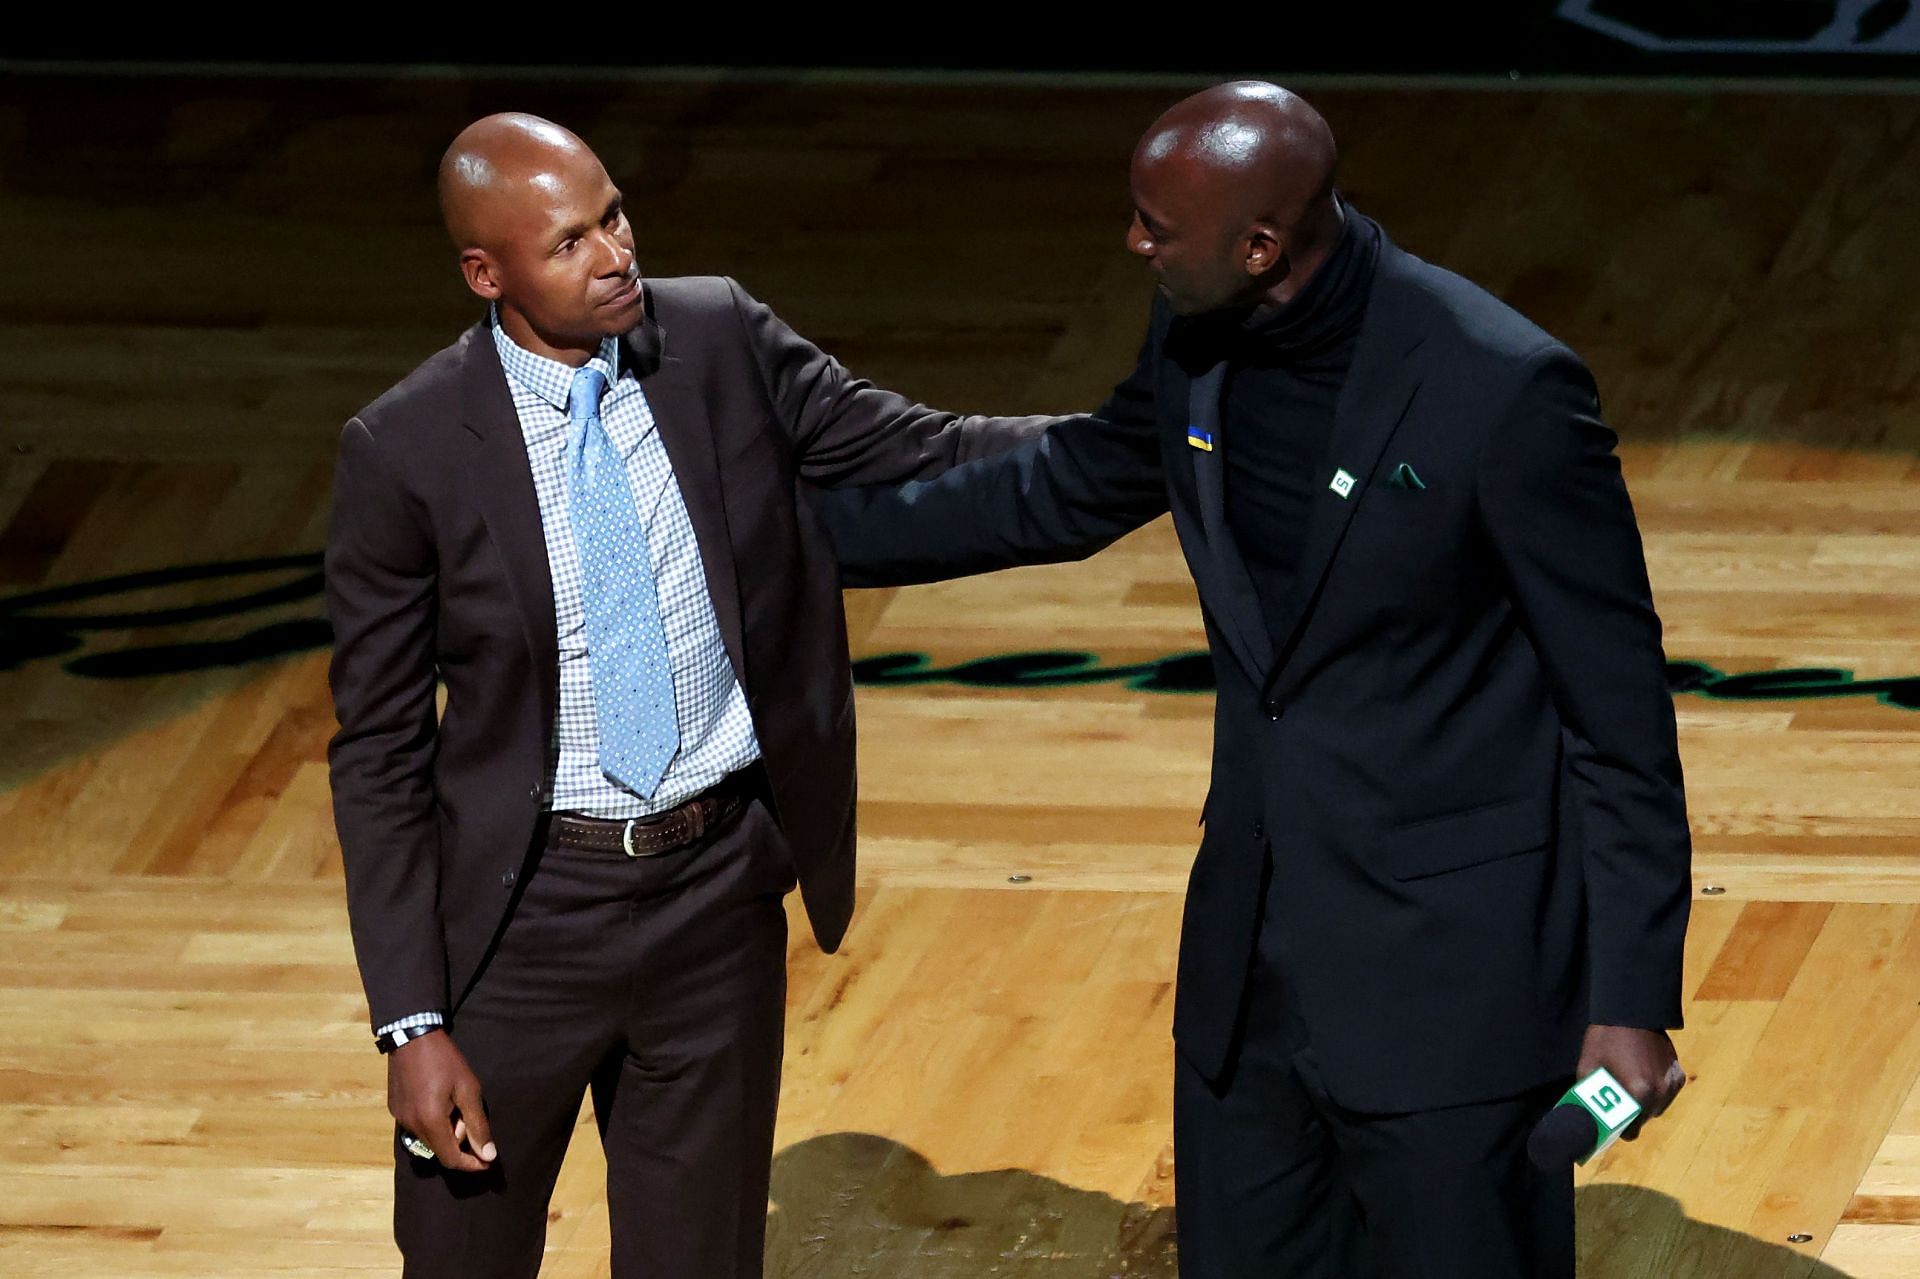 Kevin Garnett reveals why he ended beef with Ray Allen